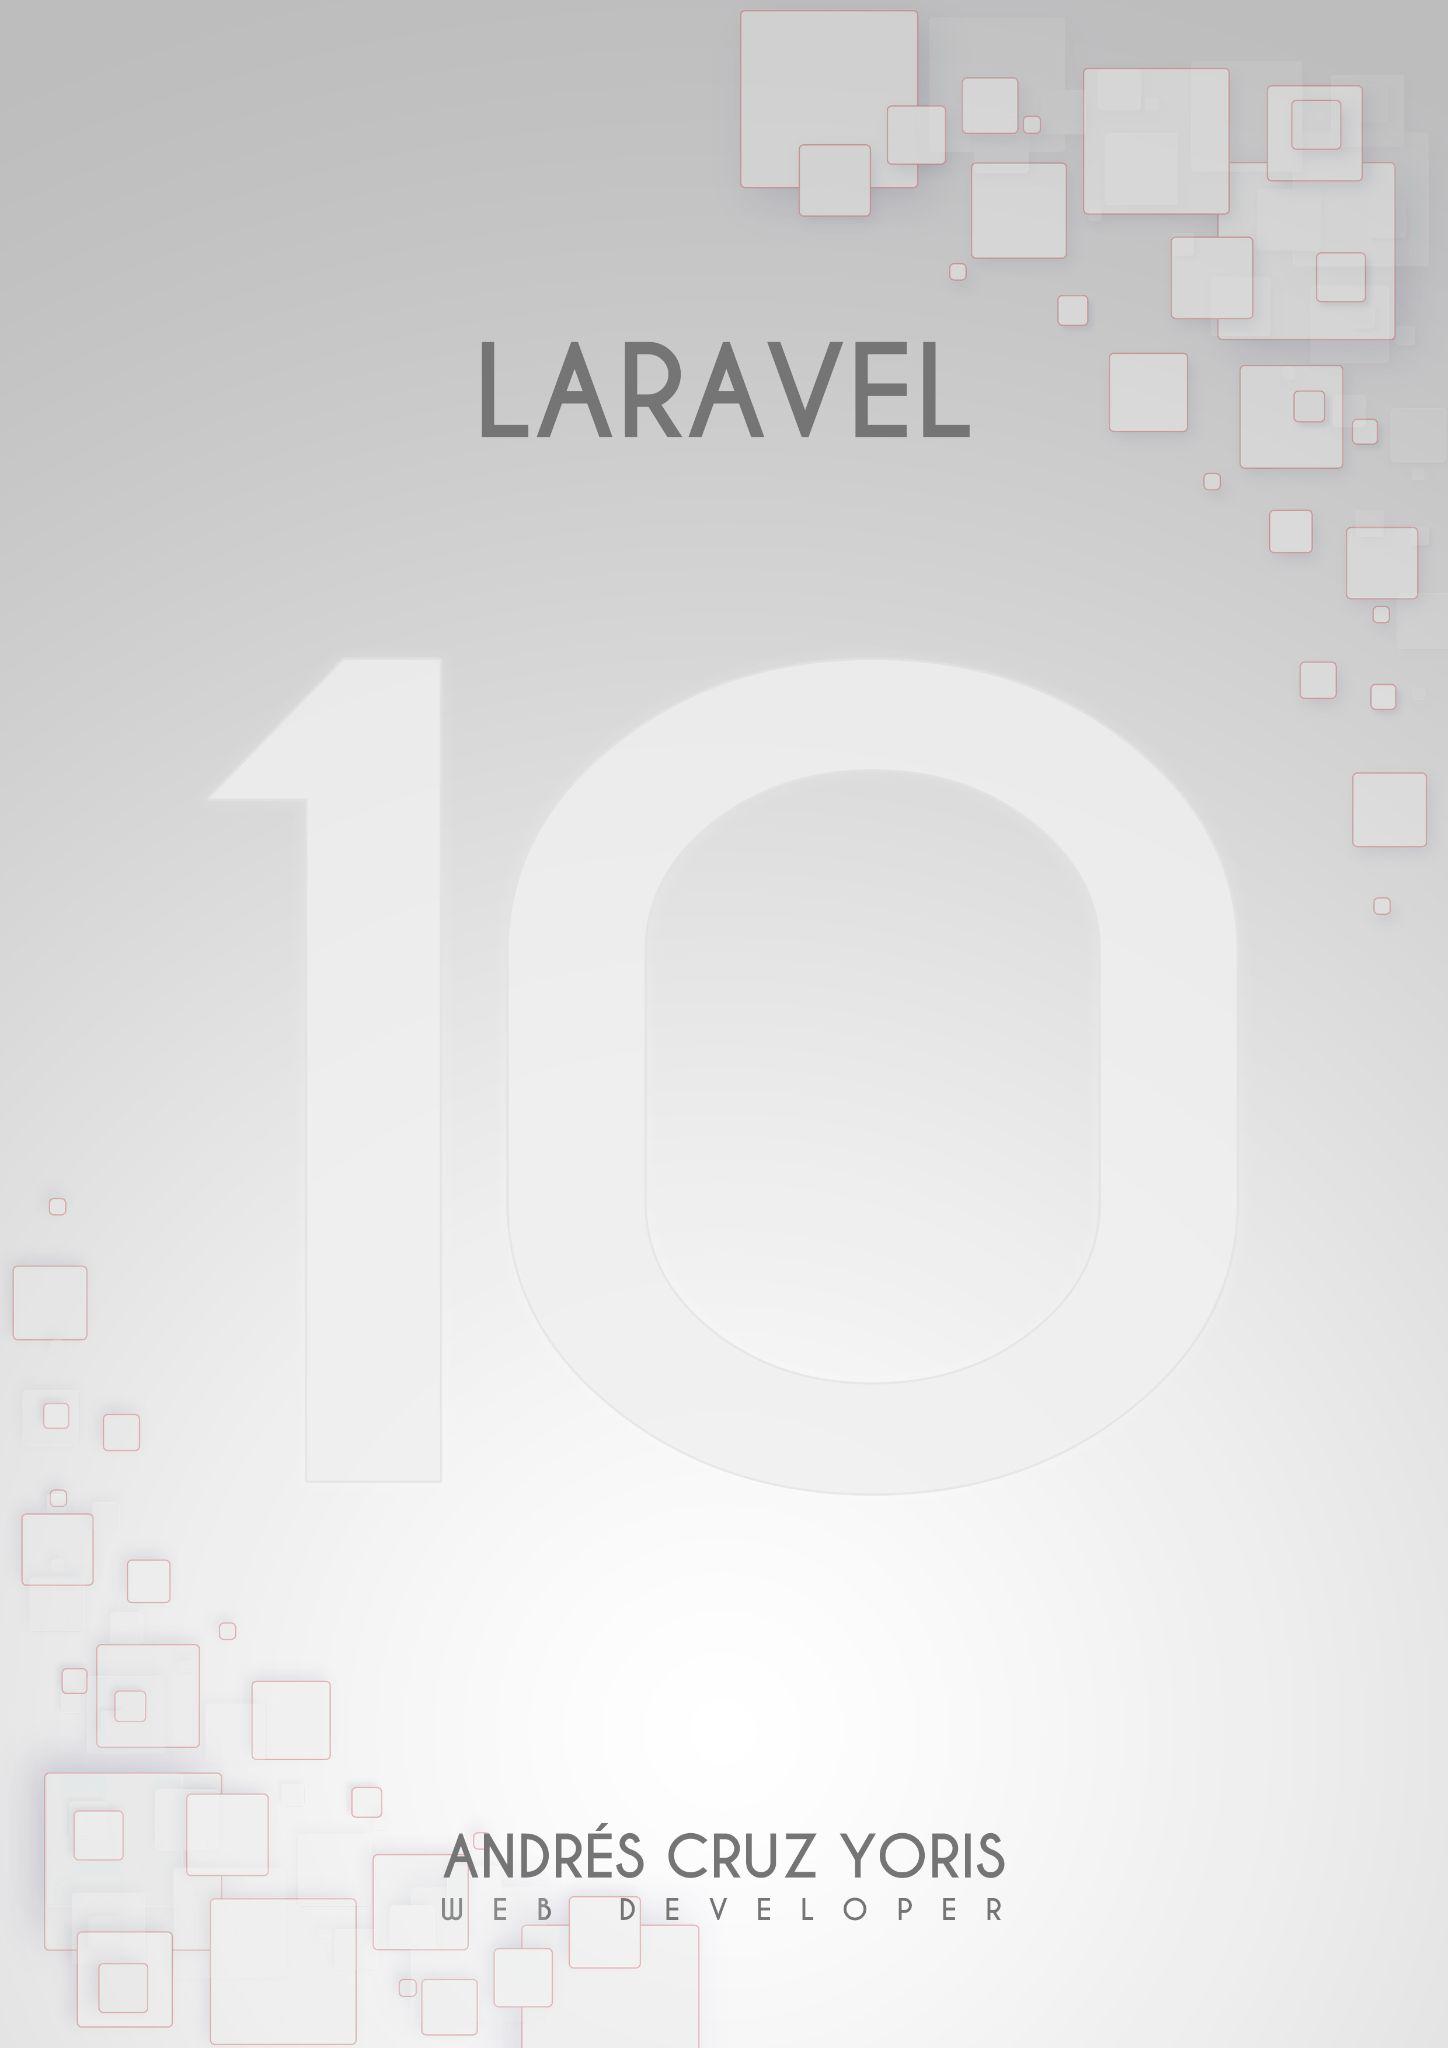 Getting started with Laravel 10, master the most popular PHP framework